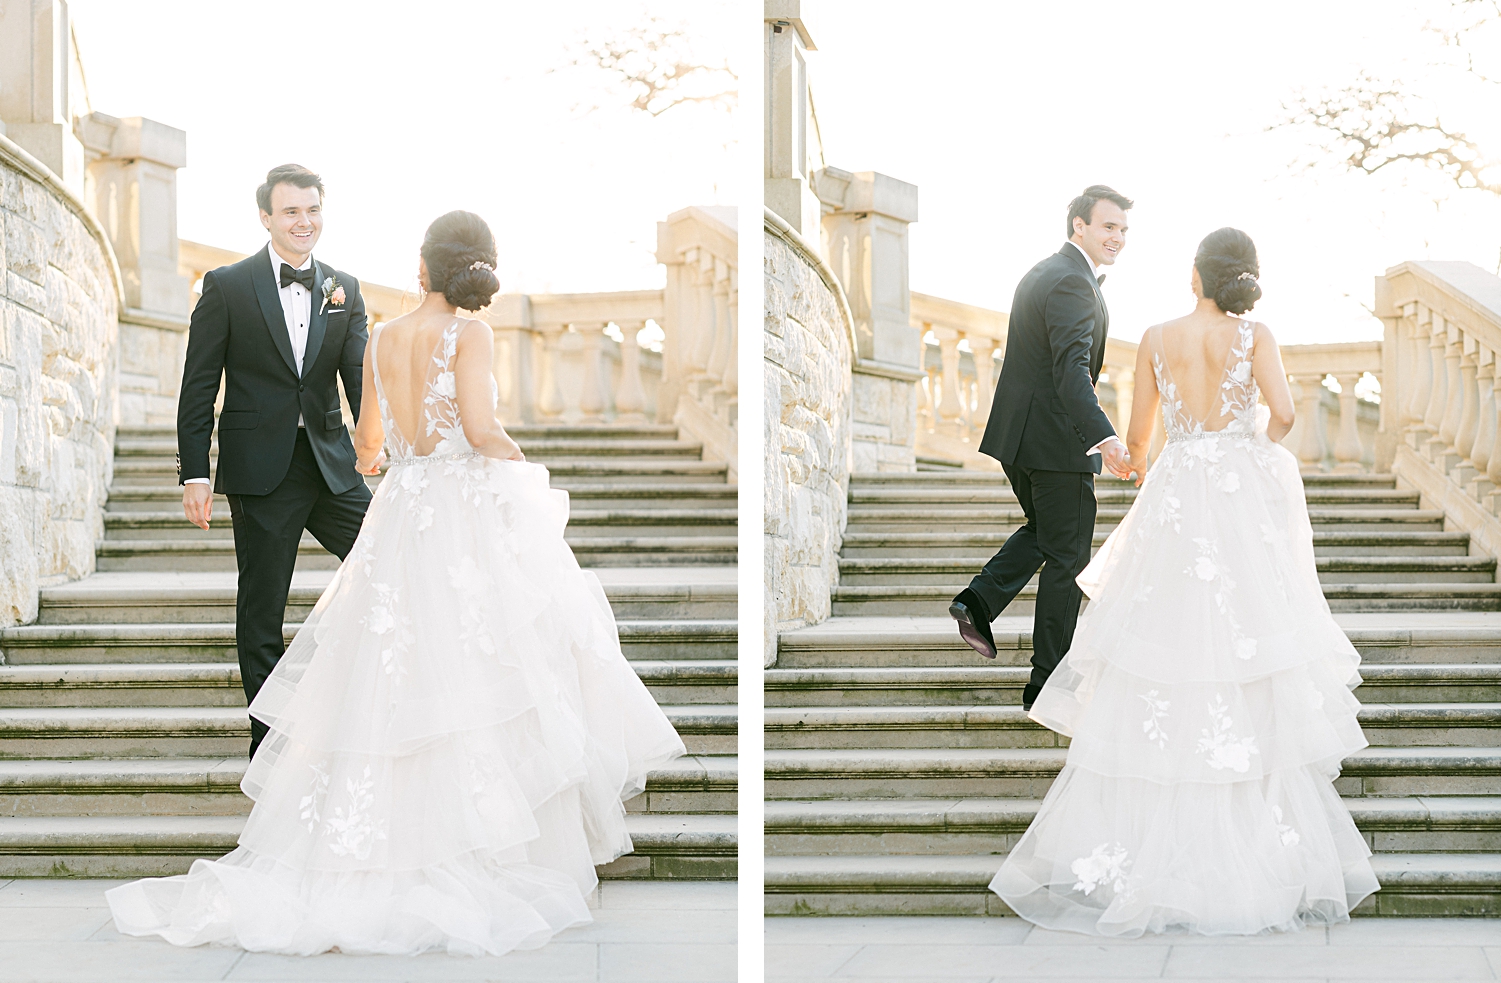 Bride and groom walking up outdoor staircase at french estate wedding at sunset